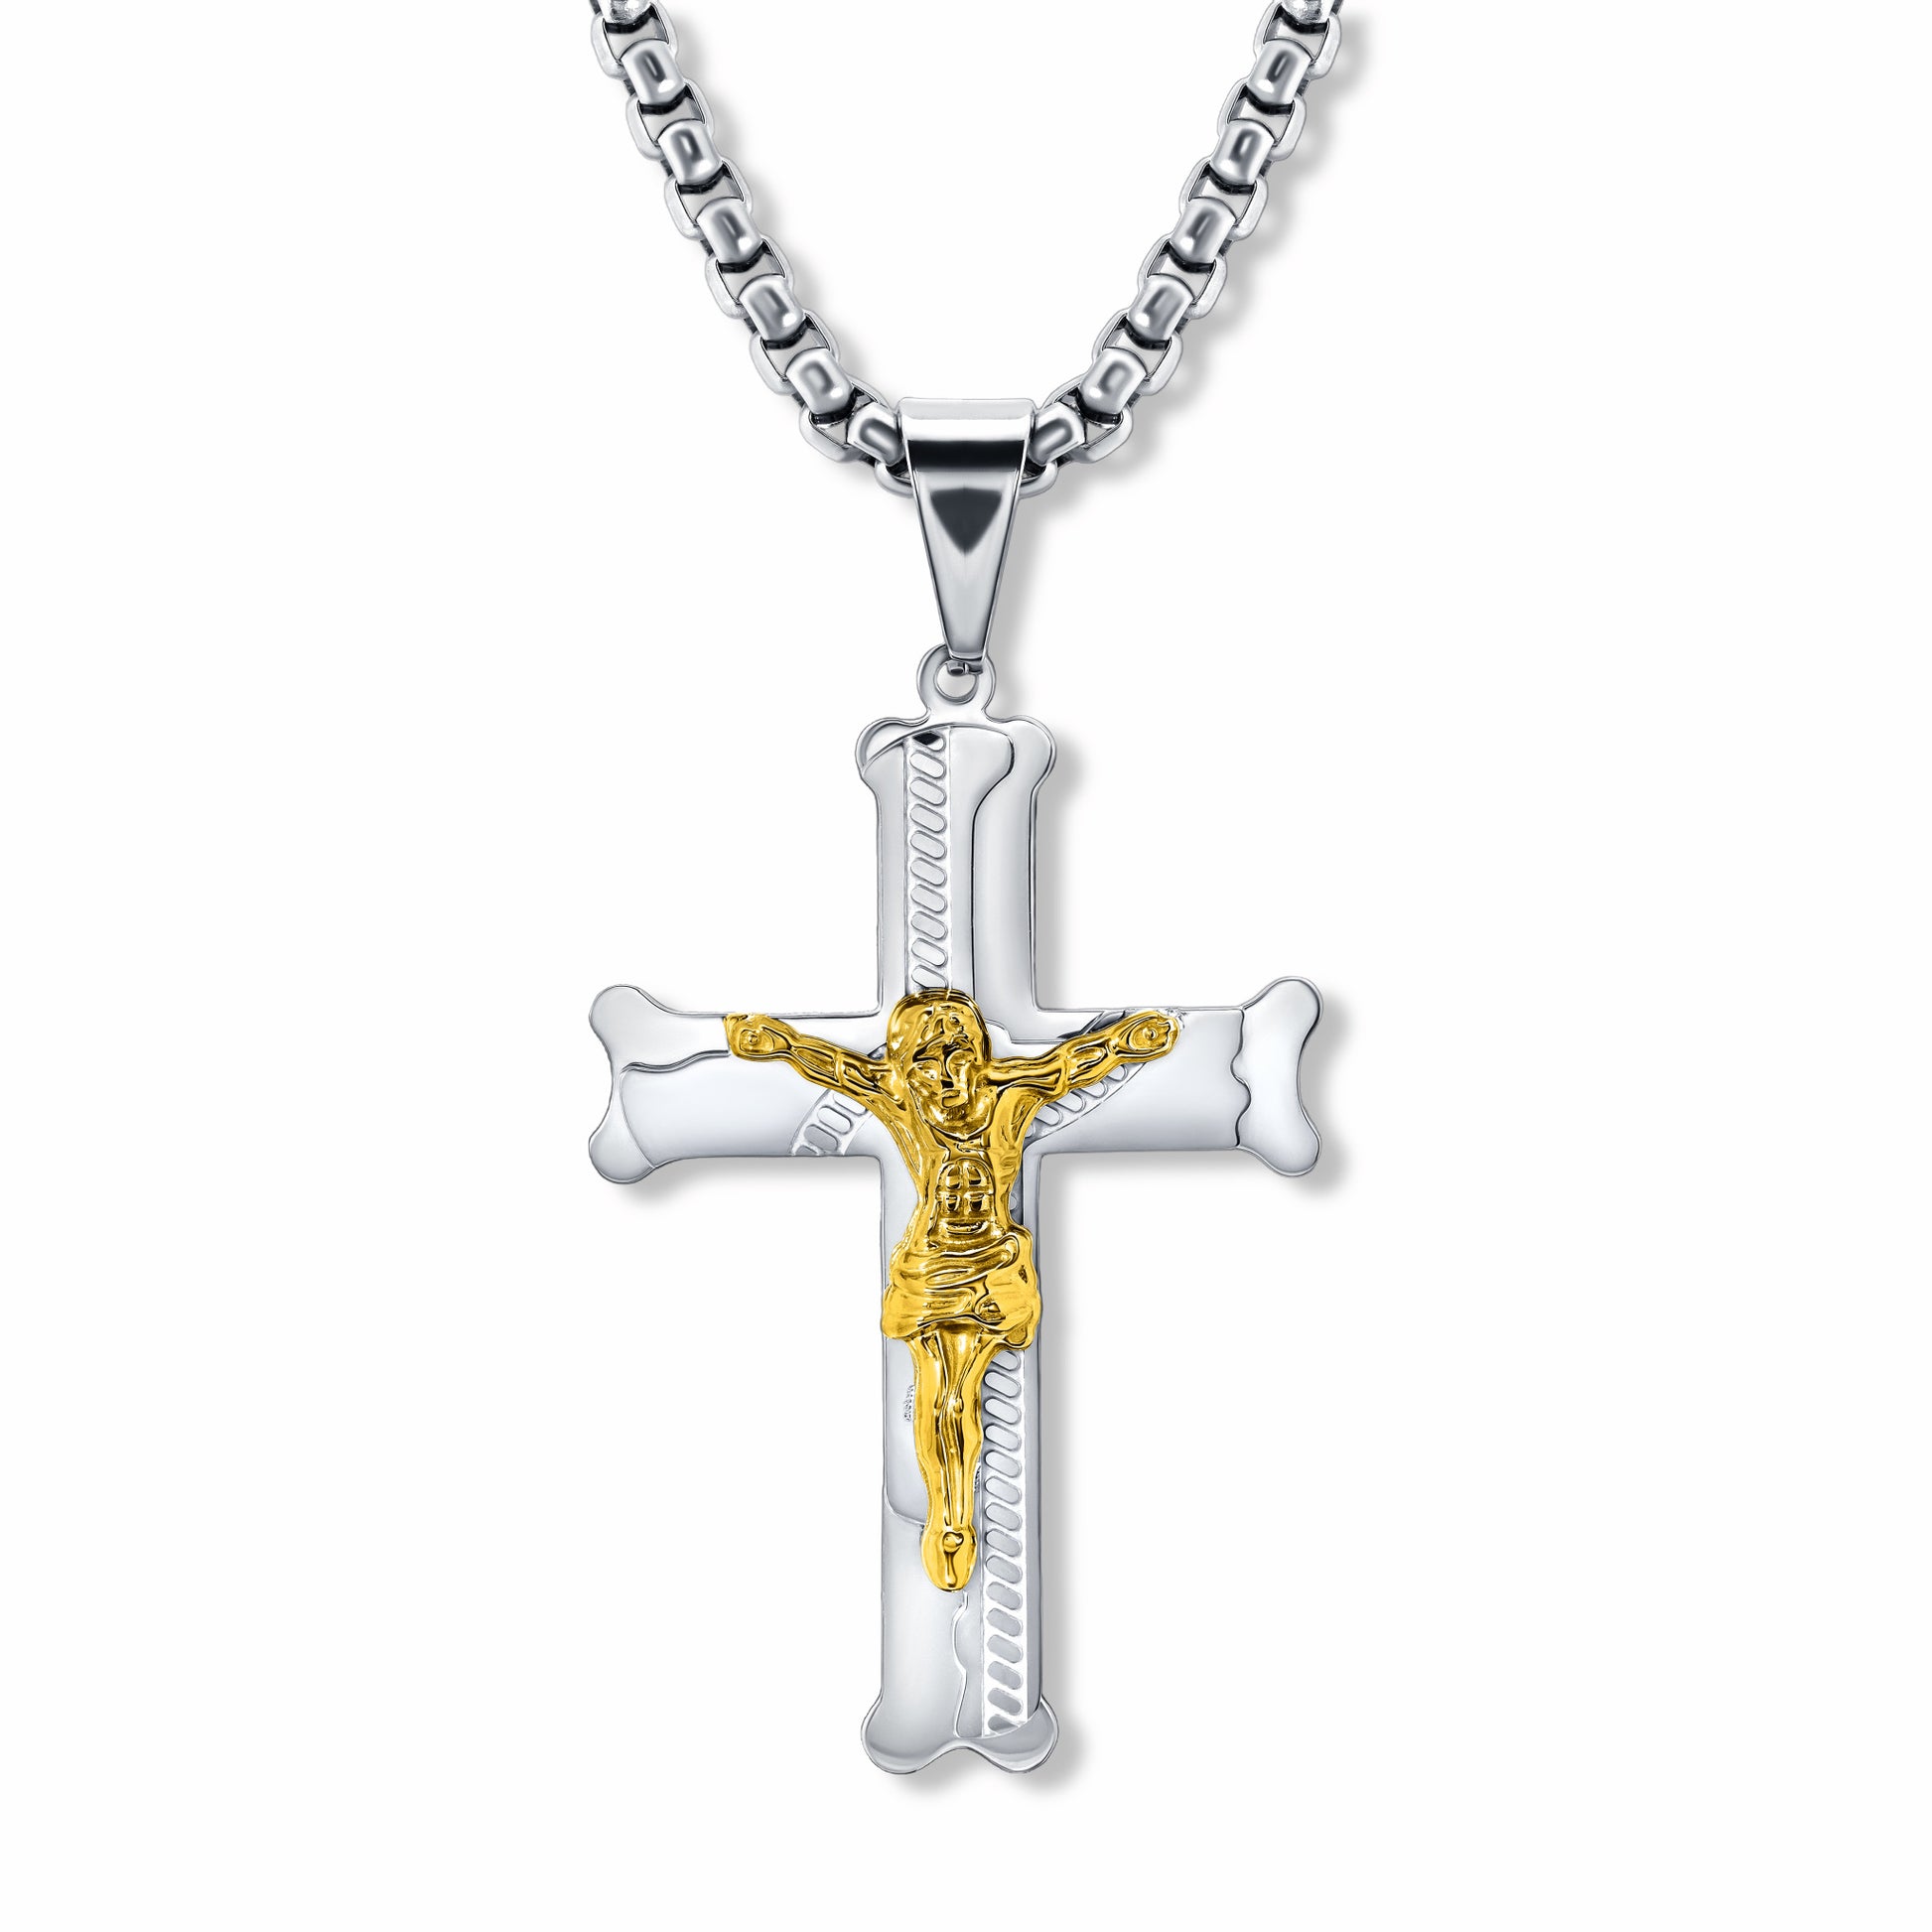 Bliss Crucifix Cross Pendant with 3mm Round Box link Silver chain on white background